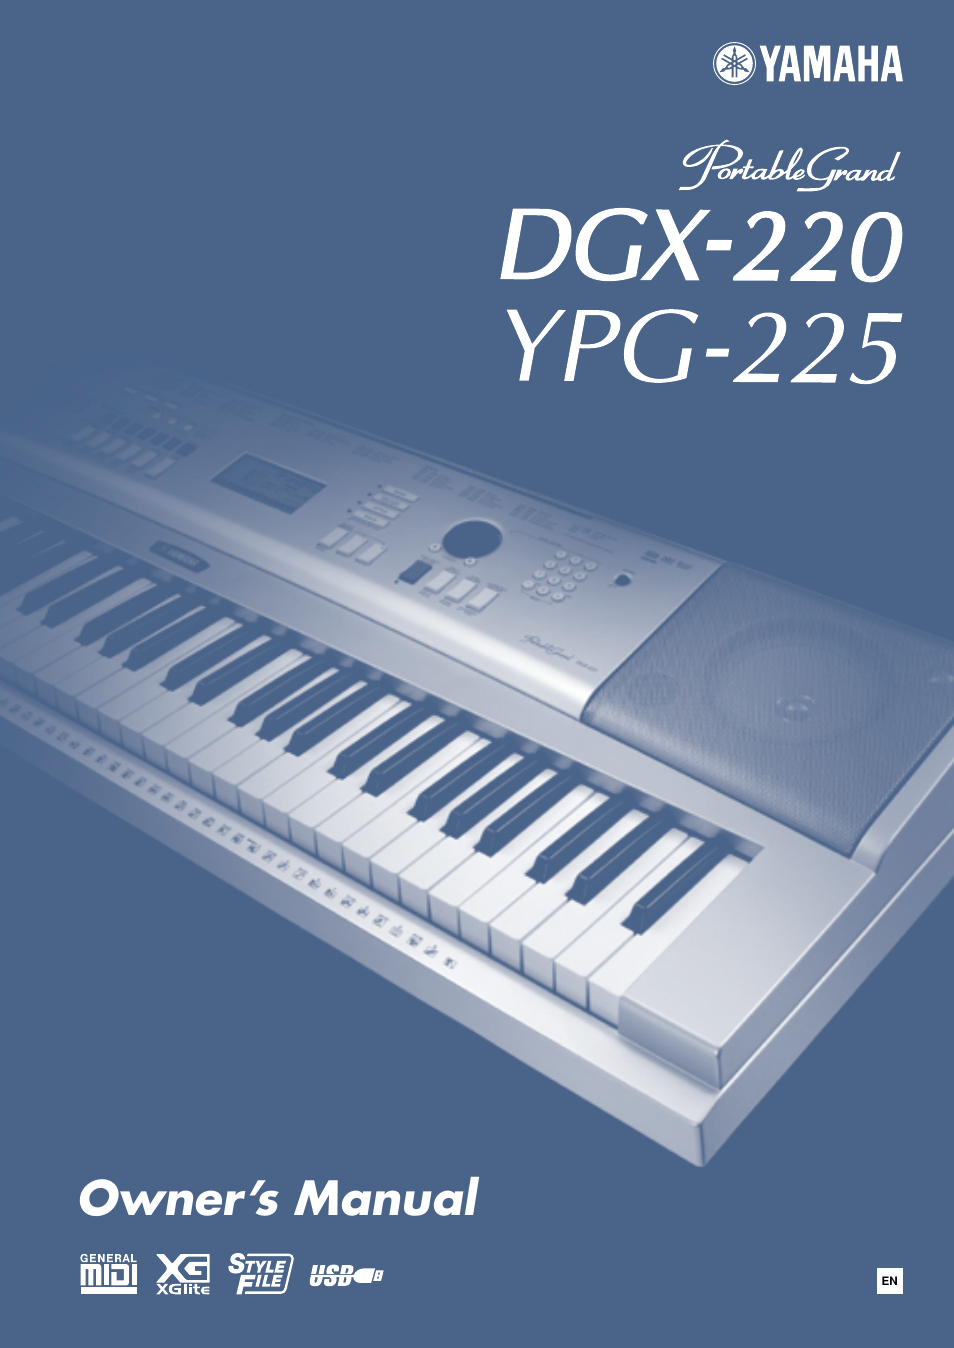 Yamaha PORTABLEGRAND YPG-225 User Manual | 118 pages